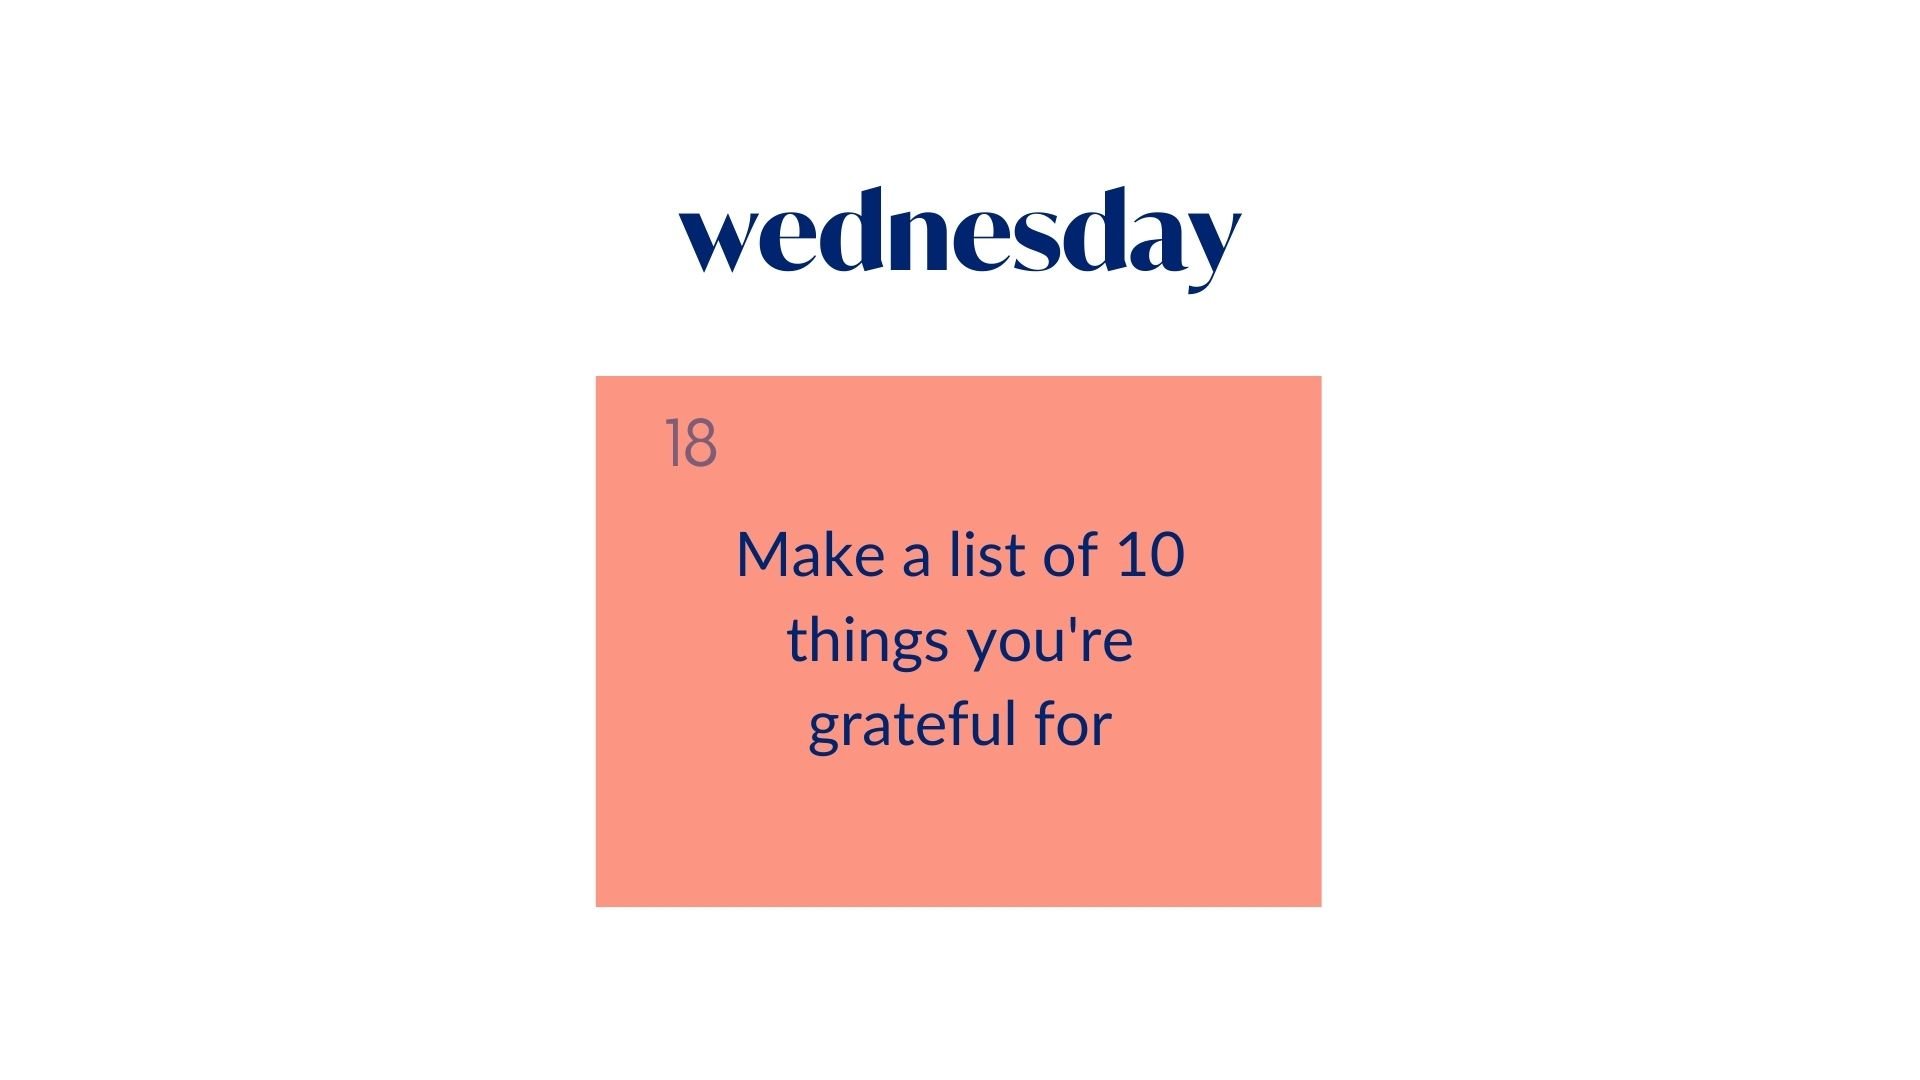 Day 18: Make a list of 10 things you're grateful for